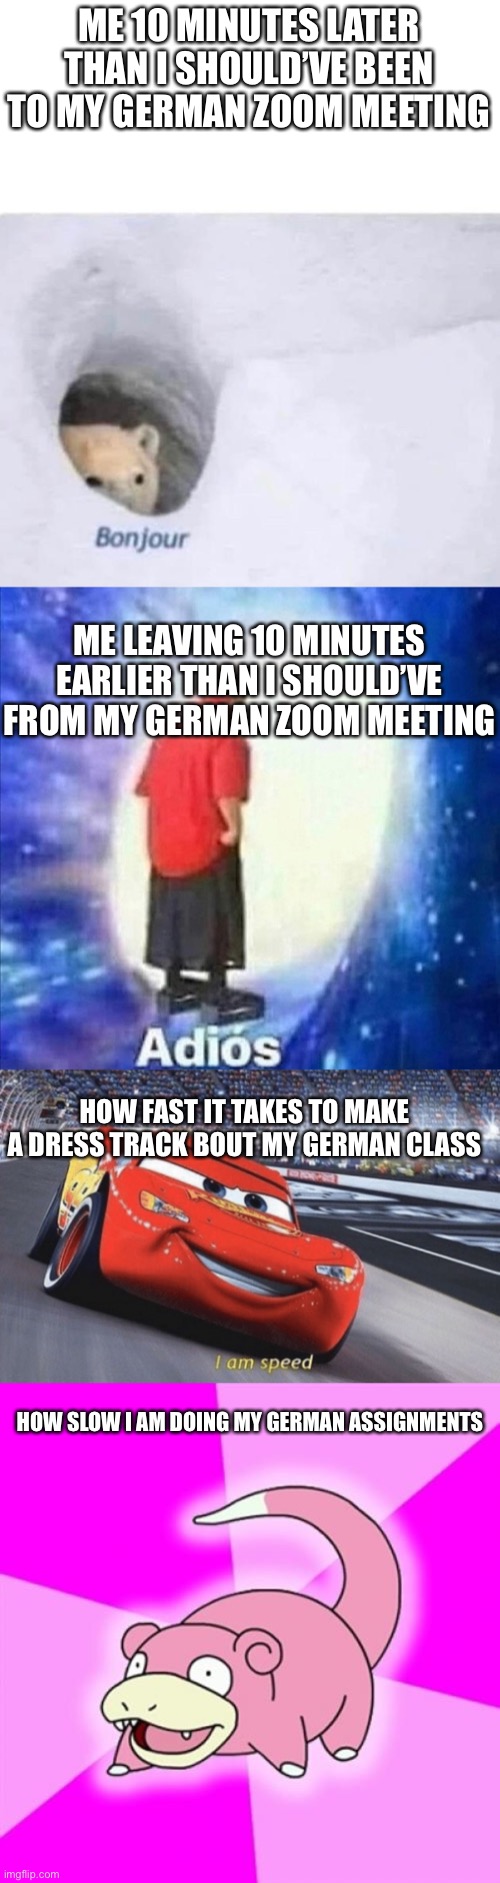 *downvotes my German teacher* | ME 10 MINUTES LATER THAN I SHOULD’VE BEEN TO MY GERMAN ZOOM MEETING; ME LEAVING 10 MINUTES EARLIER THAN I SHOULD’VE FROM MY GERMAN ZOOM MEETING; HOW FAST IT TAKES TO MAKE A DRESS TRACK BOUT MY GERMAN CLASS; HOW SLOW I AM DOING MY GERMAN ASSIGNMENTS | image tagged in bonjour,adios,i am speed,memes,slowpoke | made w/ Imgflip meme maker